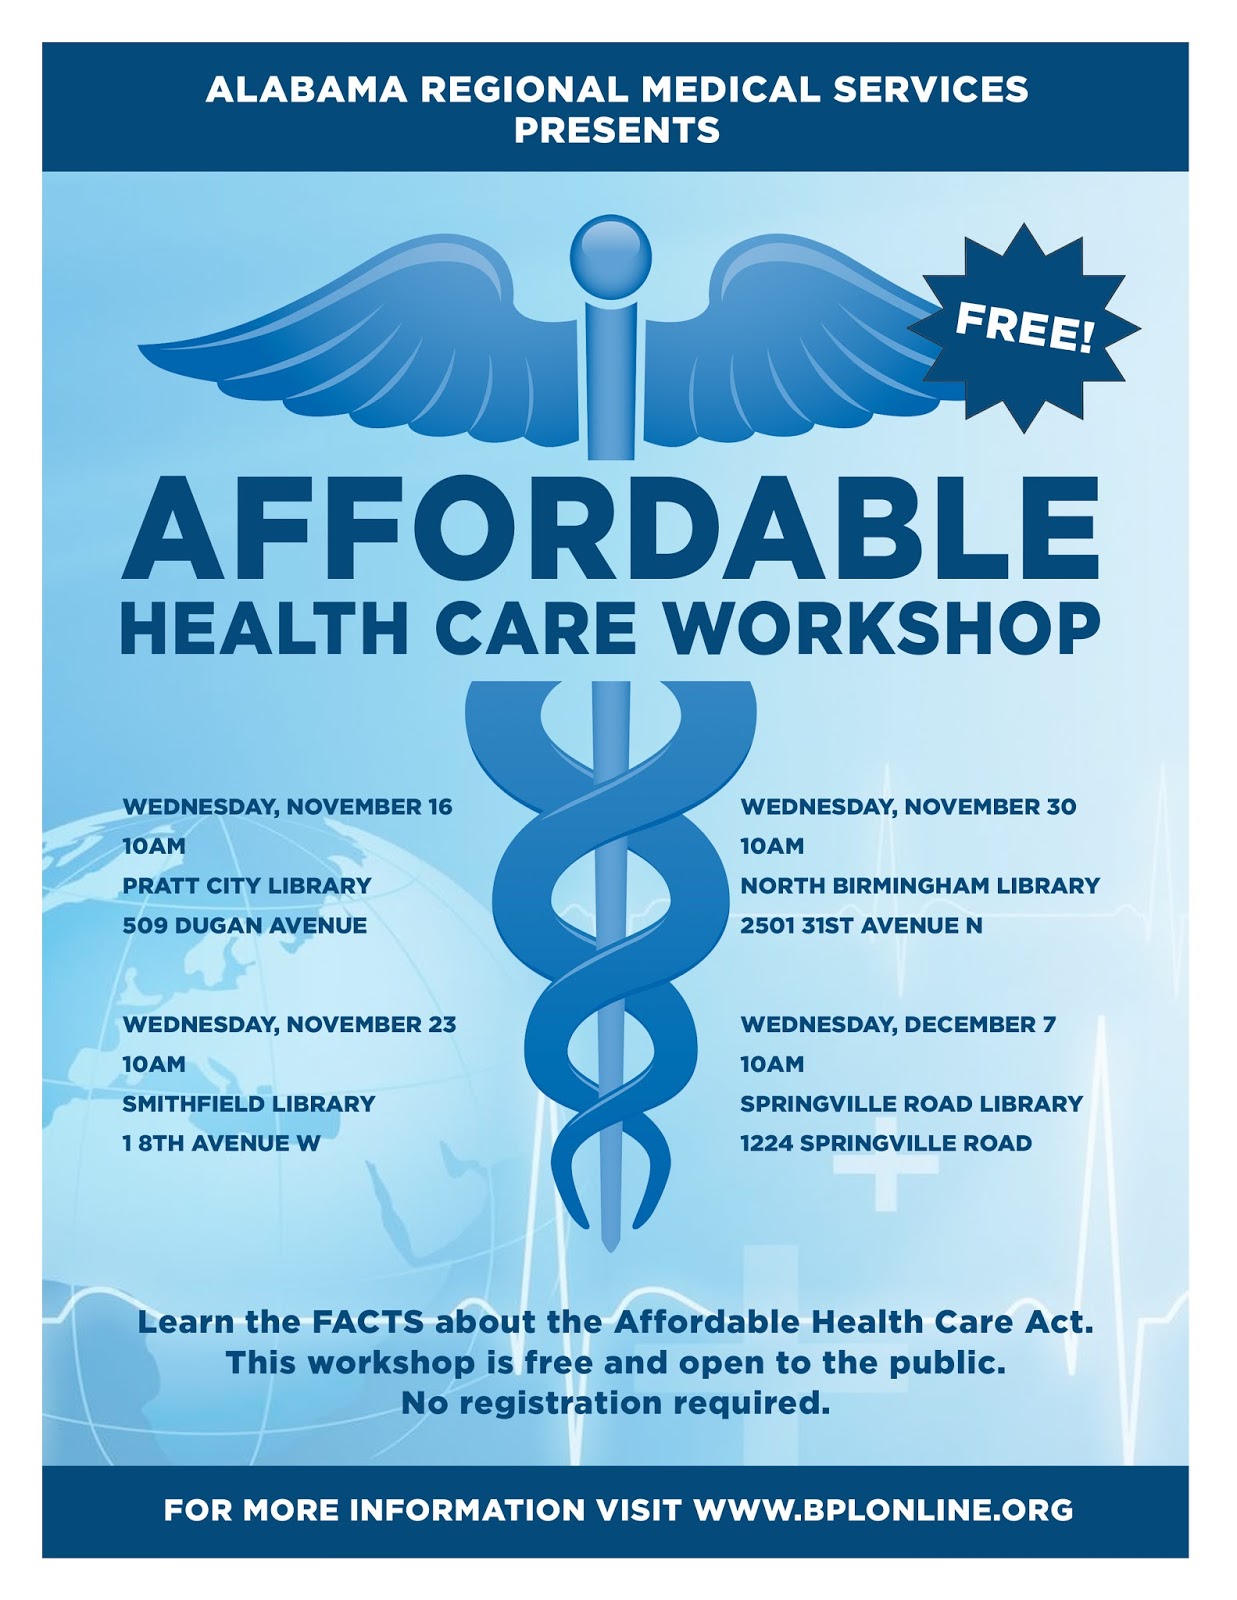 Birmingham Public Library: Free Affordable Health Care Workshops to be